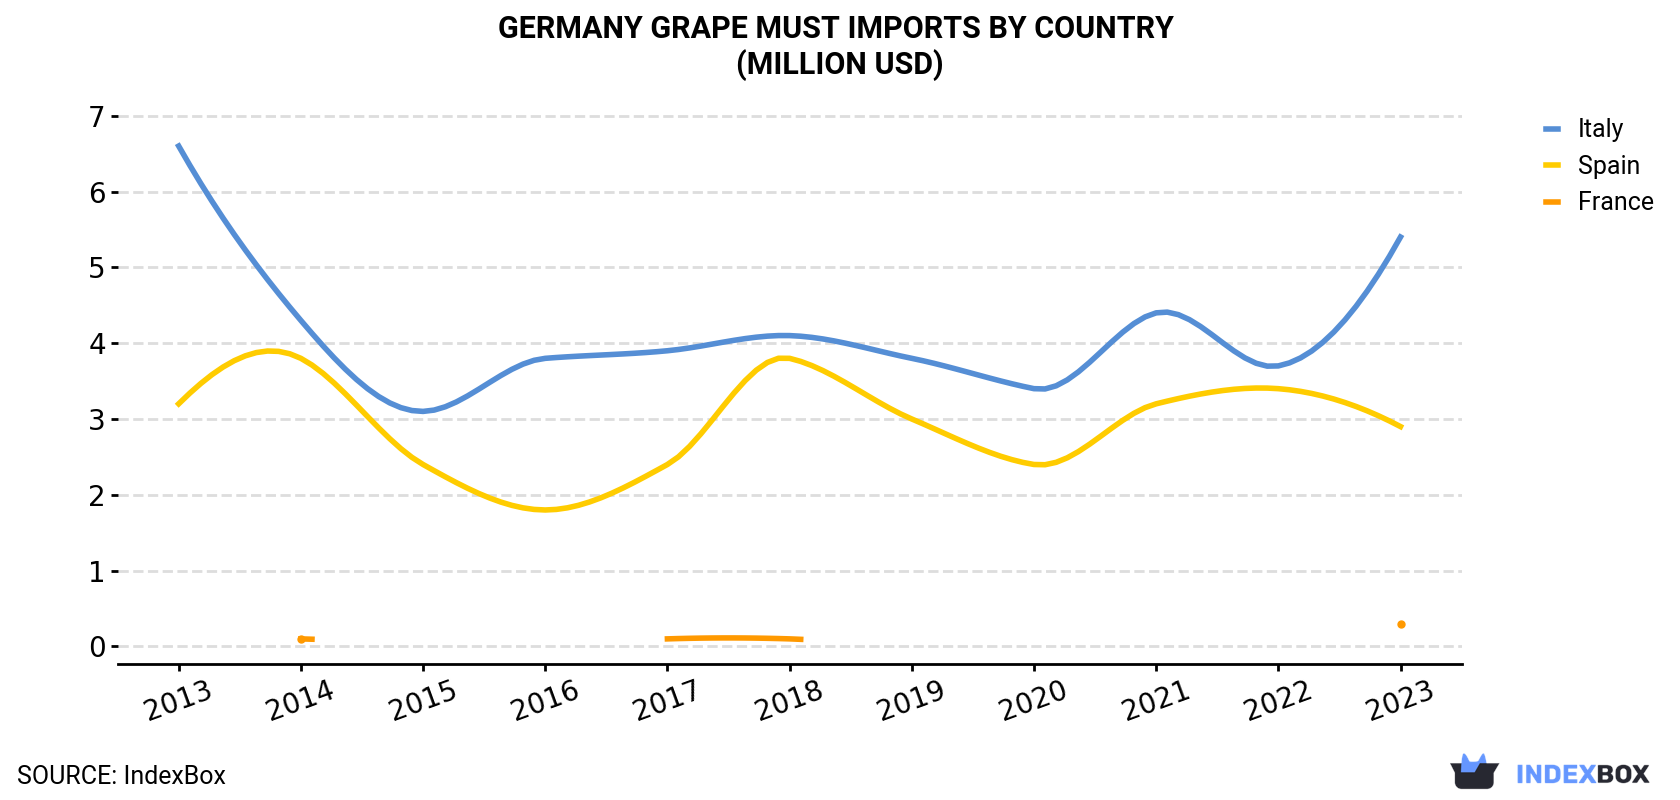 Germany Grape Must Imports By Country (Million USD)